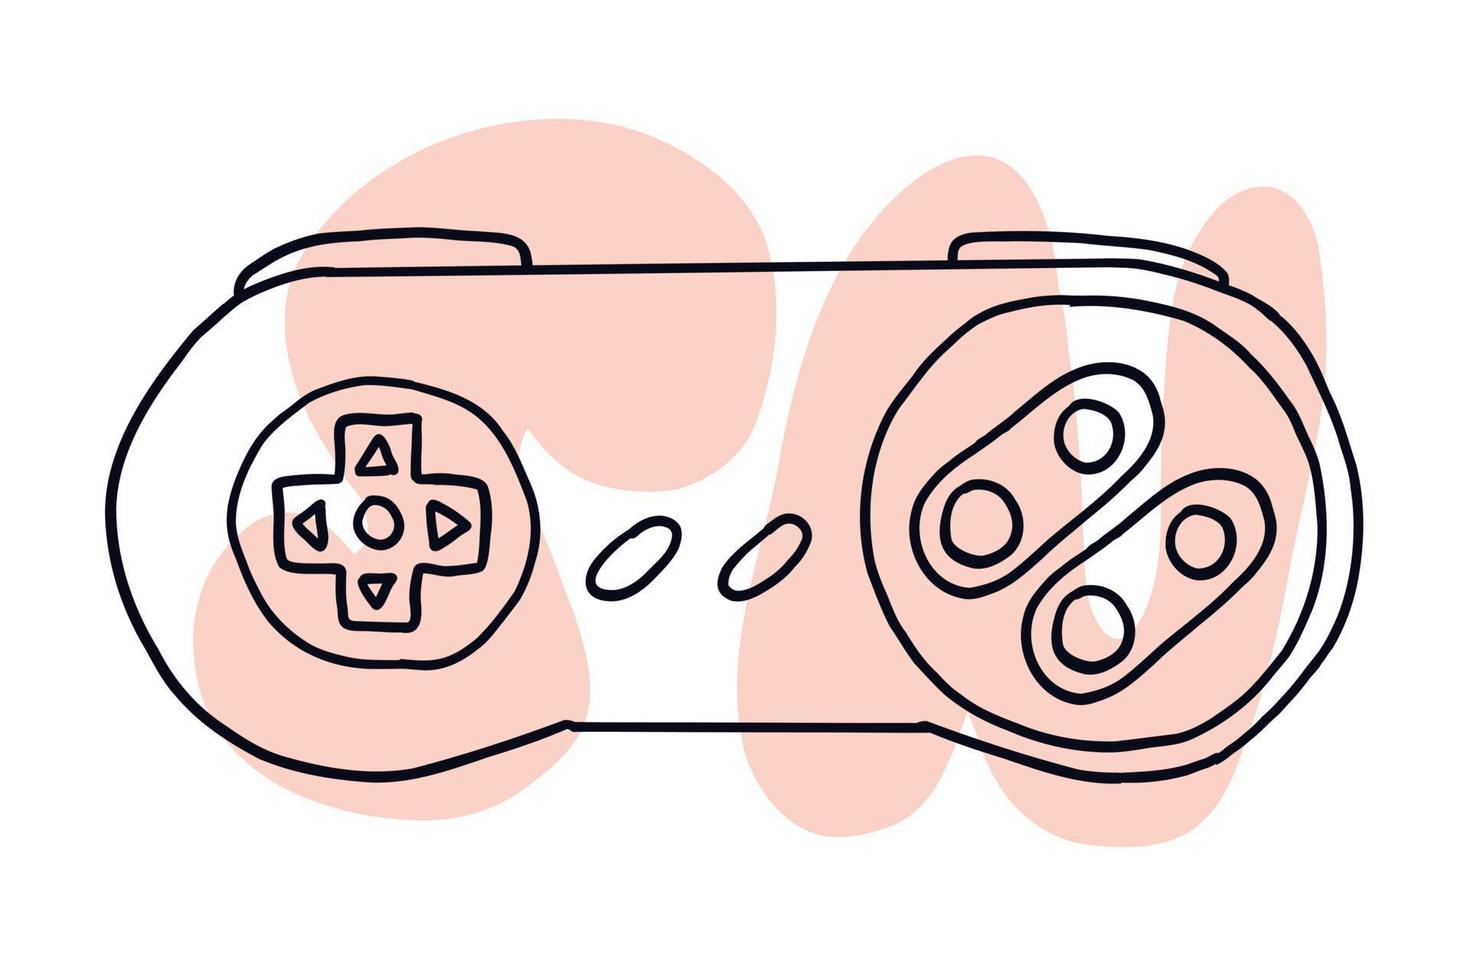 Game retro controller. Vector illustration in hand-drawn cartoon flat style isolated on white background.